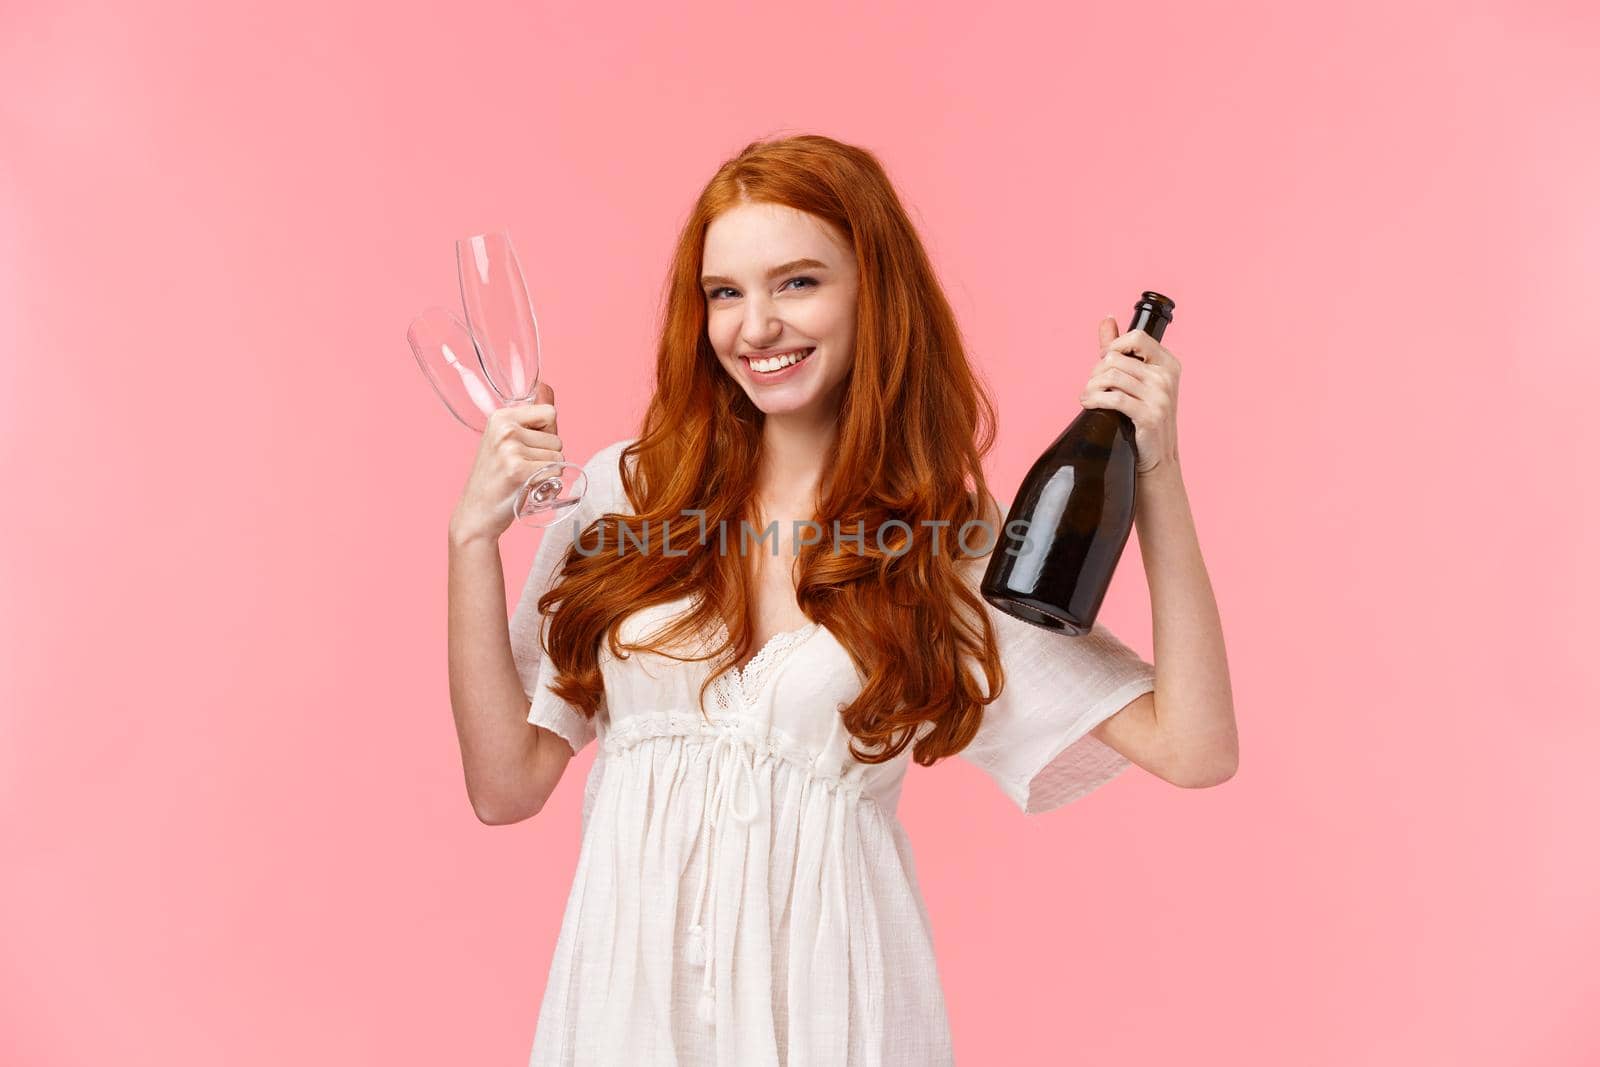 Sassy good-looking redhead woman celebrating with girlfriends, having fun together, holding bottle champagne and two glasses, invite for drink, smiling cheeky and happy, stand pink background.